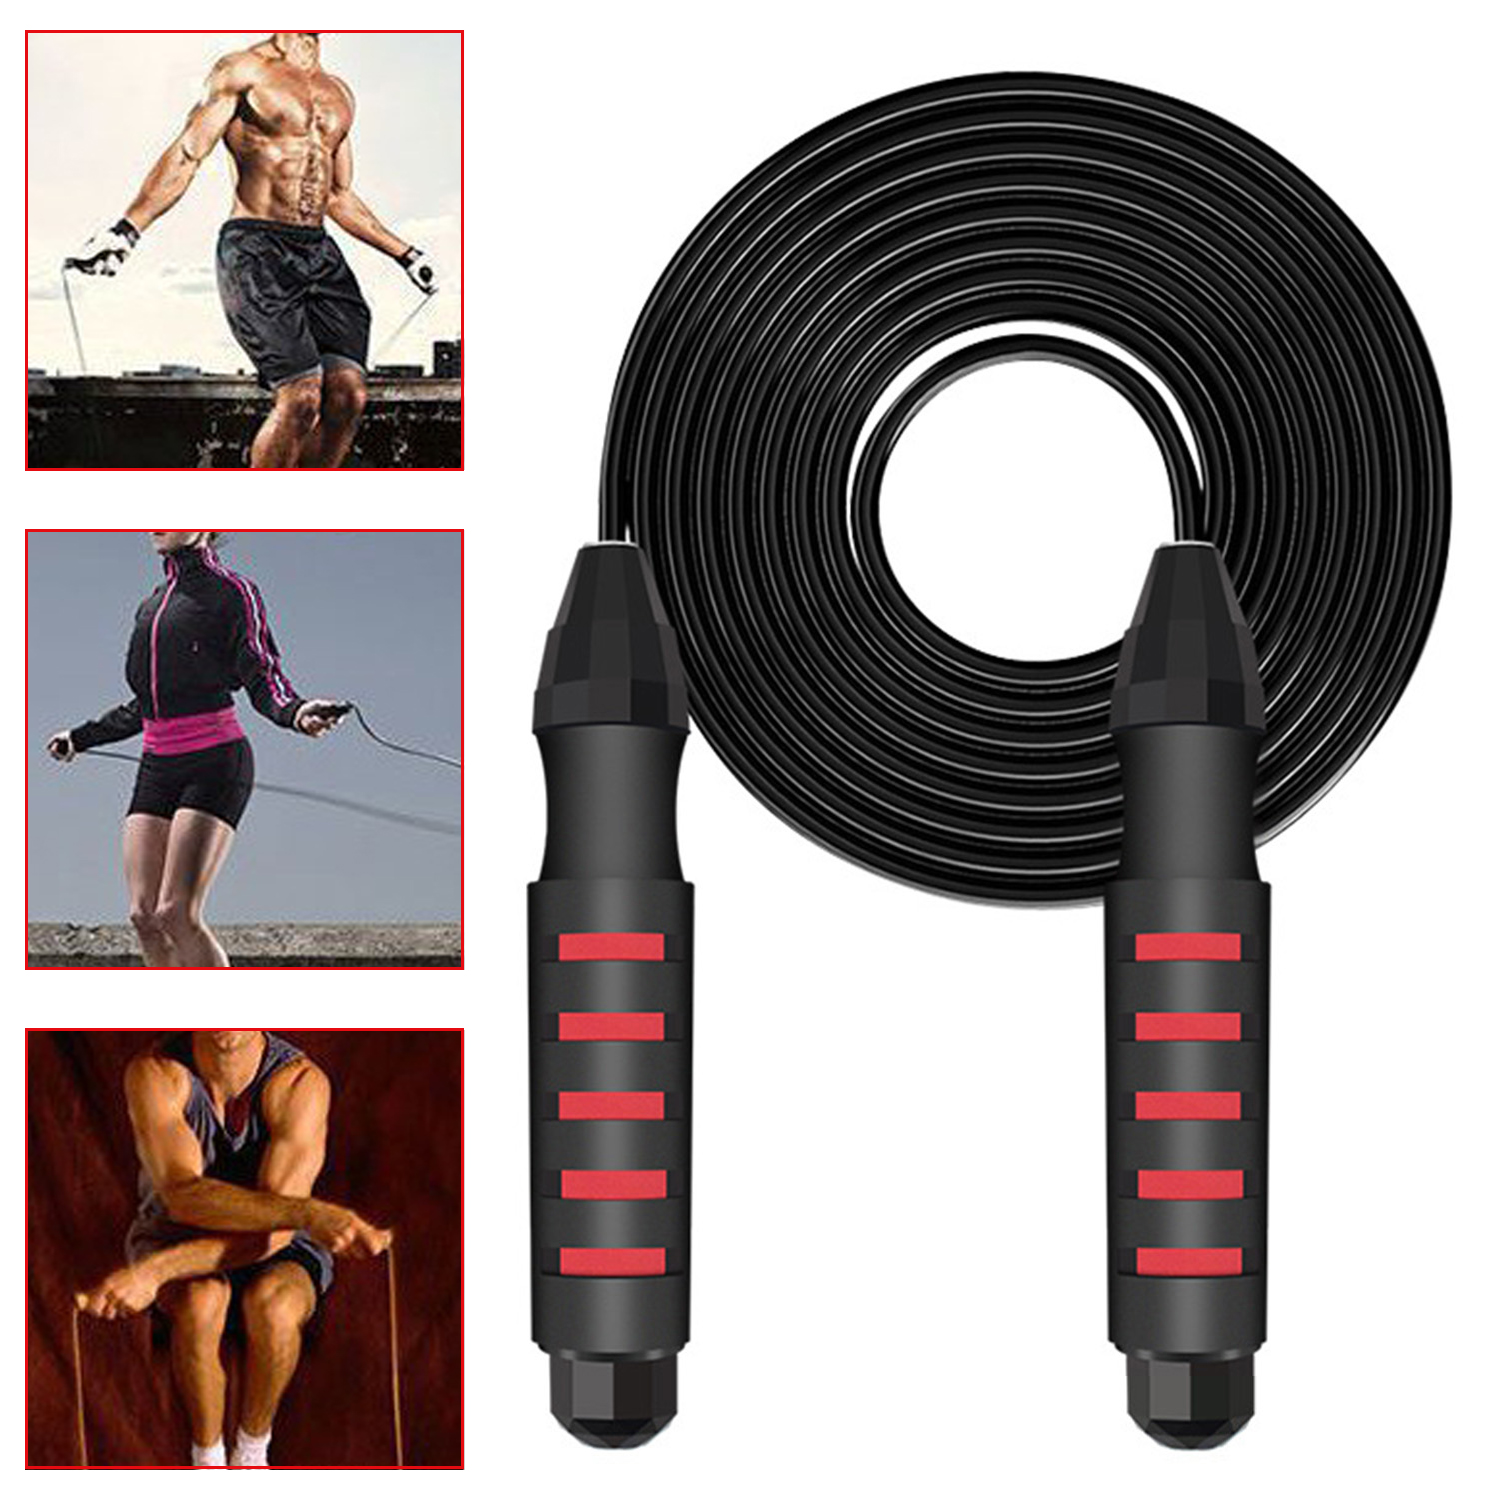 2.8m Long Pvc Steel Skipping Rope Workout Training Gear Adjustable Steel Wire Home Gym Fitness Equipment